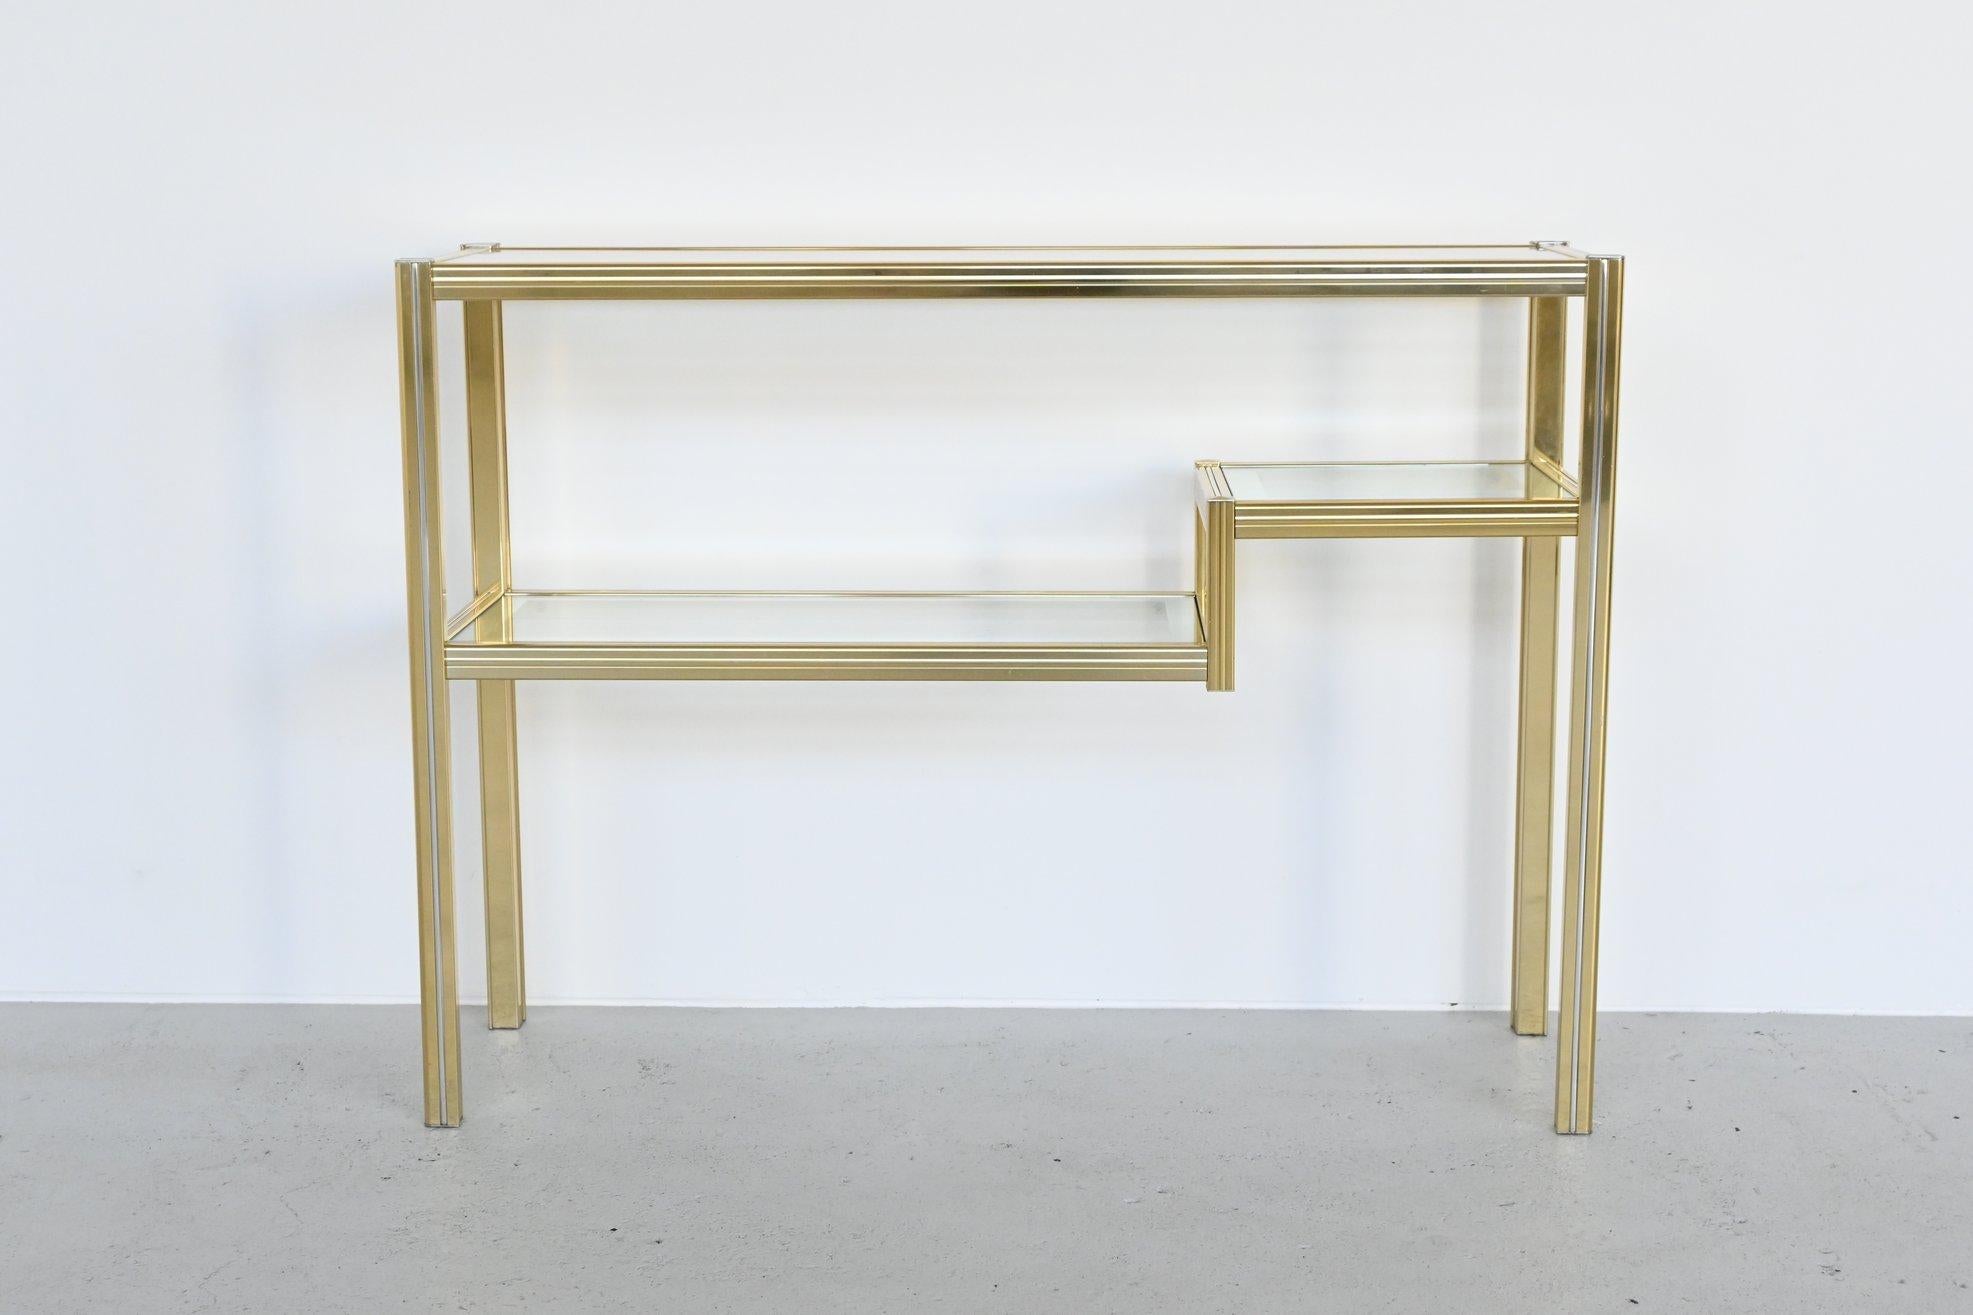 Beautiful high console table designed by Pierre Vandel, France 1970. This double level table has a brass metal frame with a chromed aluminium rim that support 3 glass plates with mirrored edges. It’s very decorative, practical to use and in very